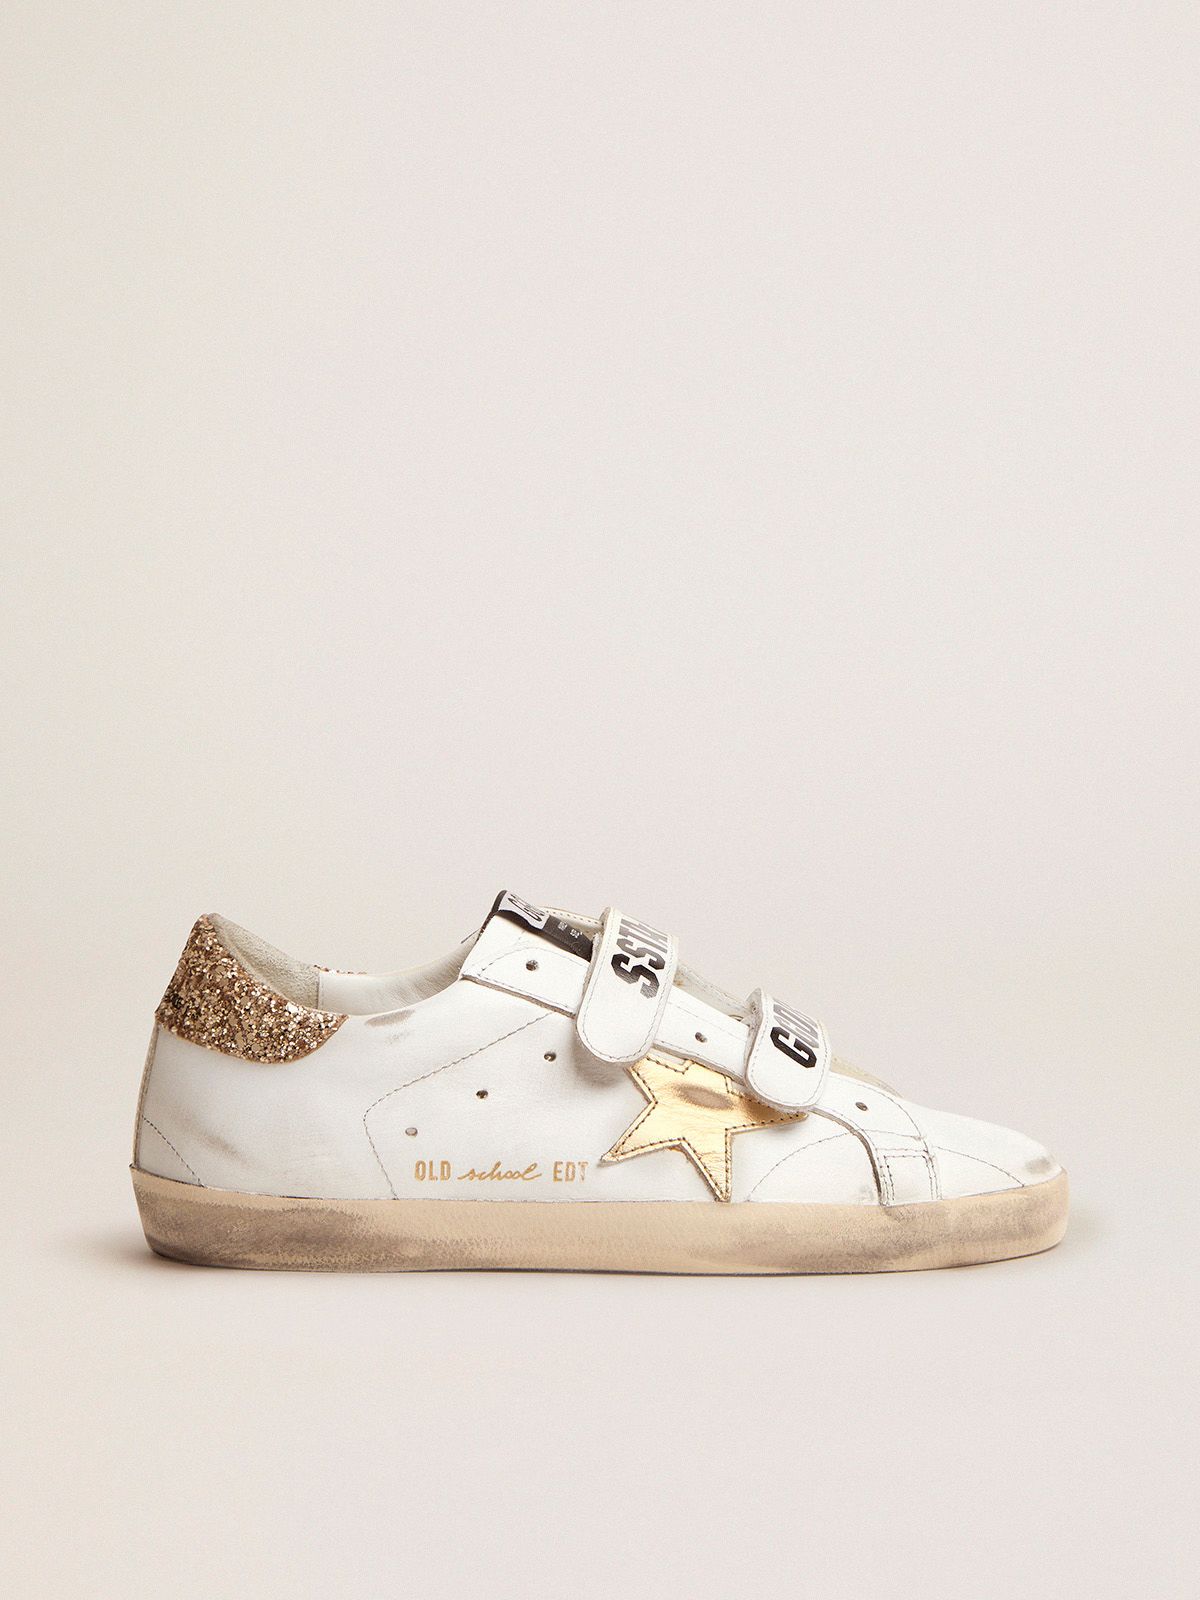 golden goose and tab School leather heel Old star gold sneakers laminated with glitter